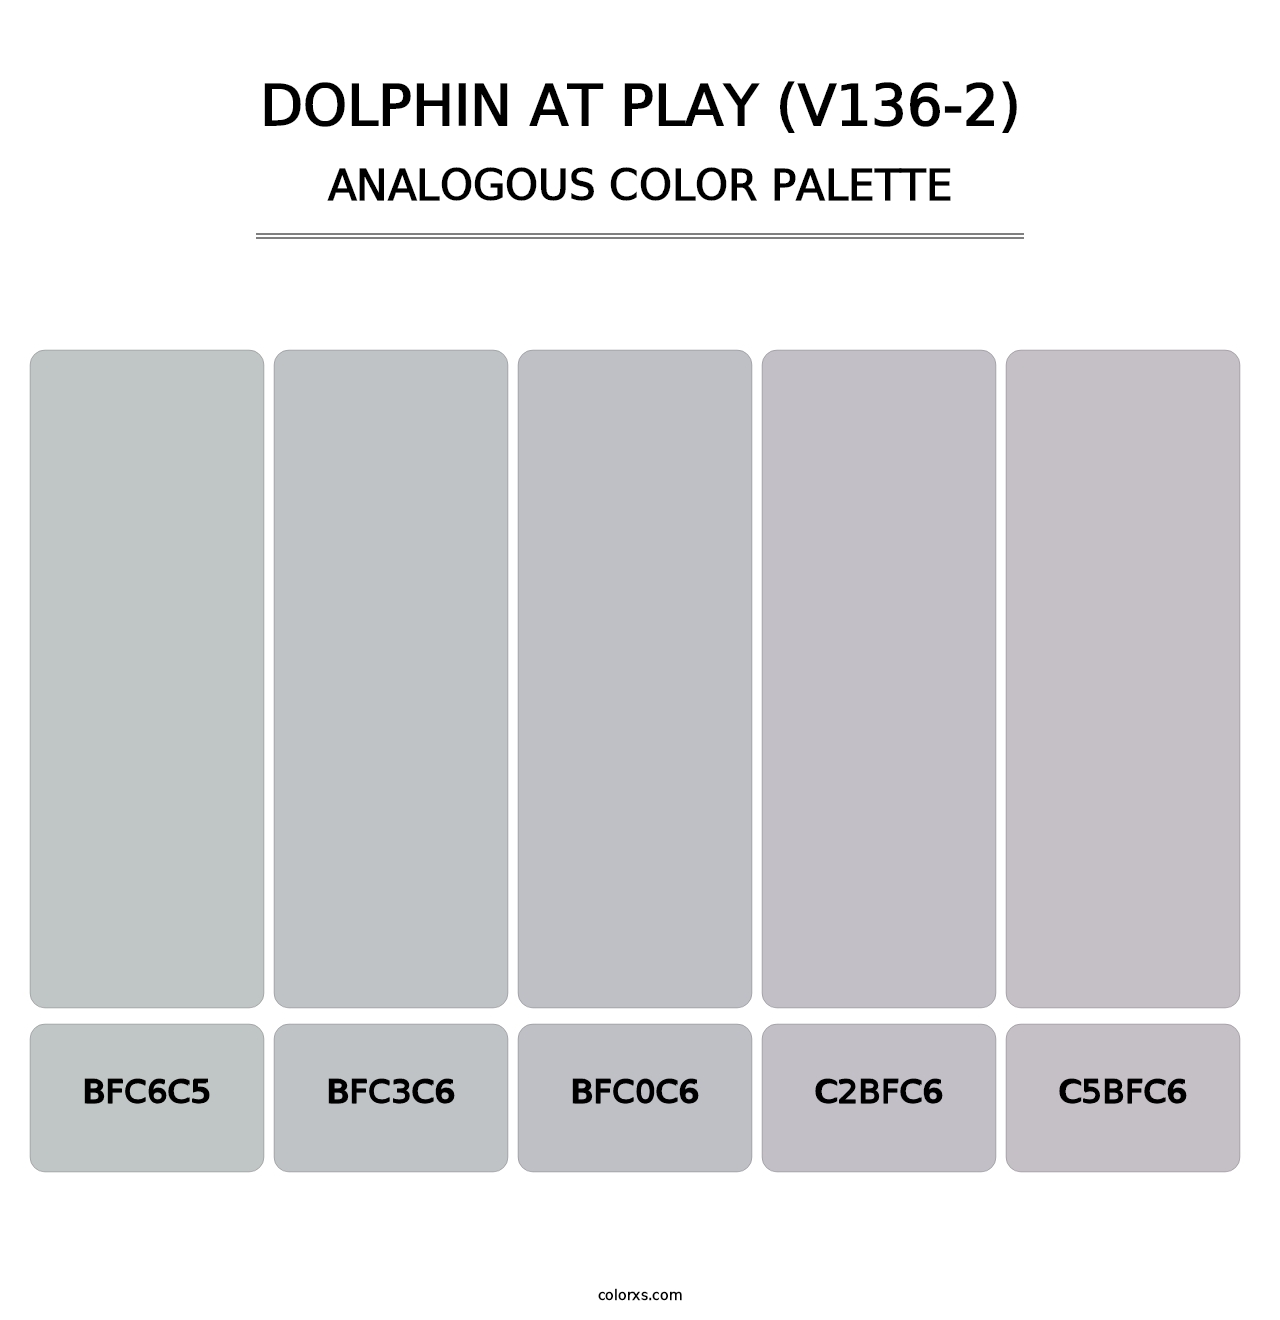 Dolphin at Play (V136-2) - Analogous Color Palette